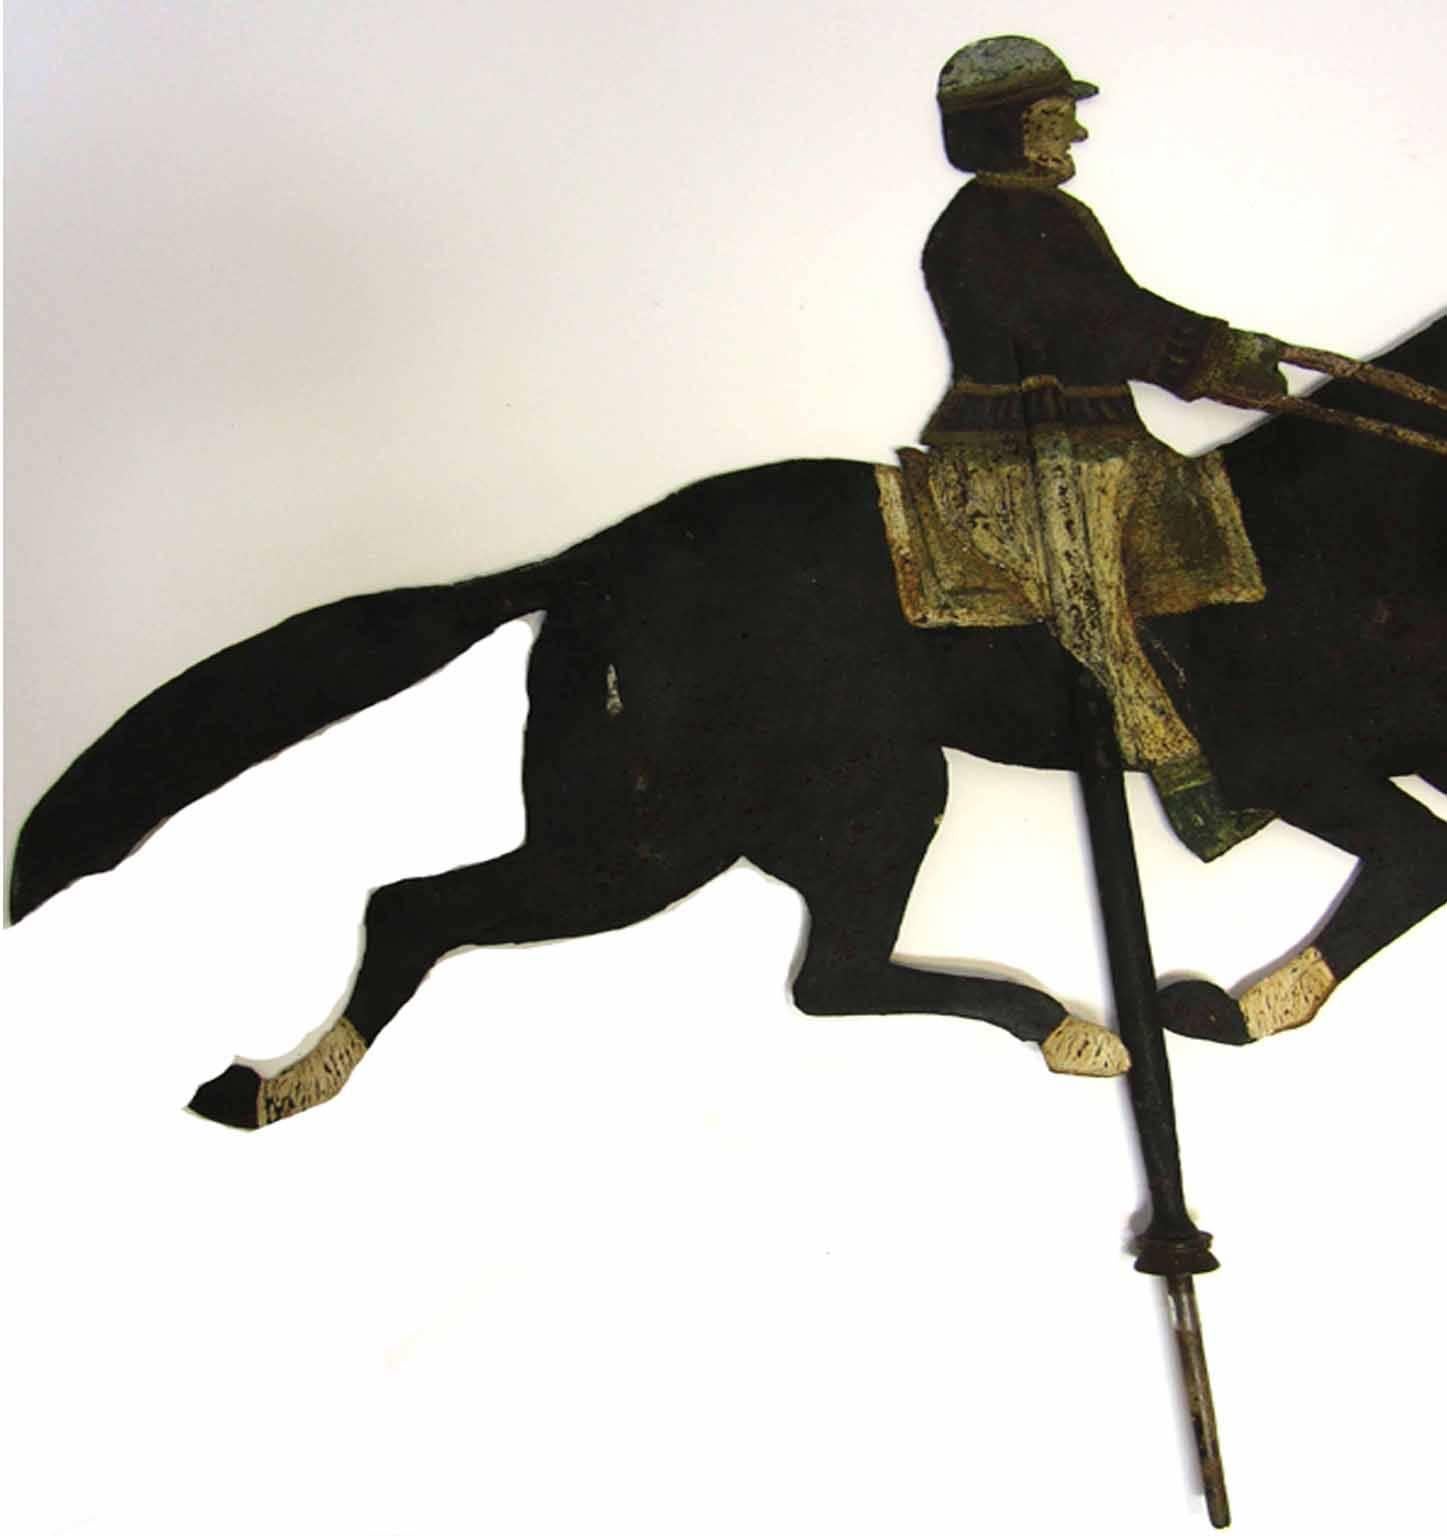 Weather vane {formerly from the carriage house on the Penn seltzer farm, Lebanon county, Pennsylvania}; depicting a figure of a rider wearing a billed cap mounted on a striding horse, with original paint colors. Circa 1825. 